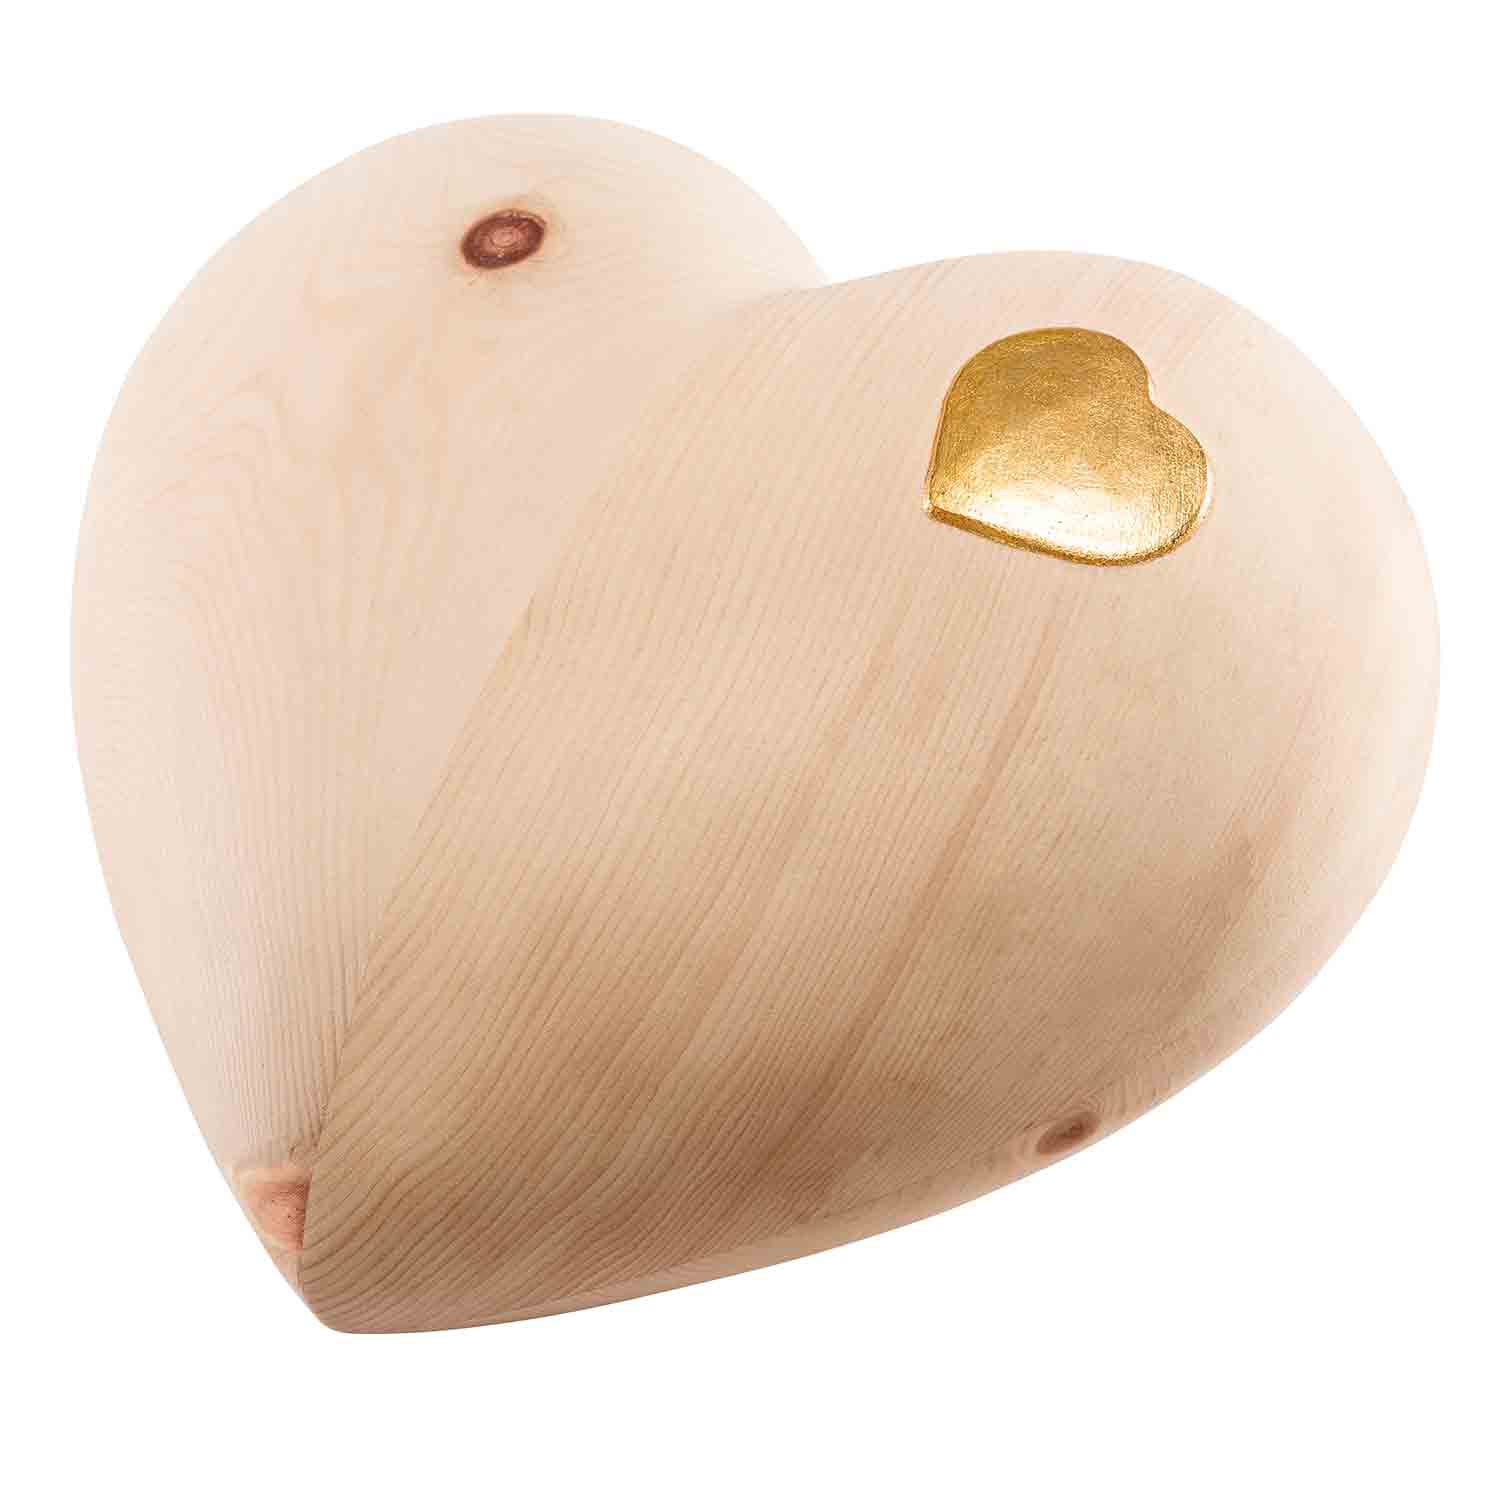 Heart Cremation Urn for Ashes Adult in Swiss Pine Wood with Gold Heart